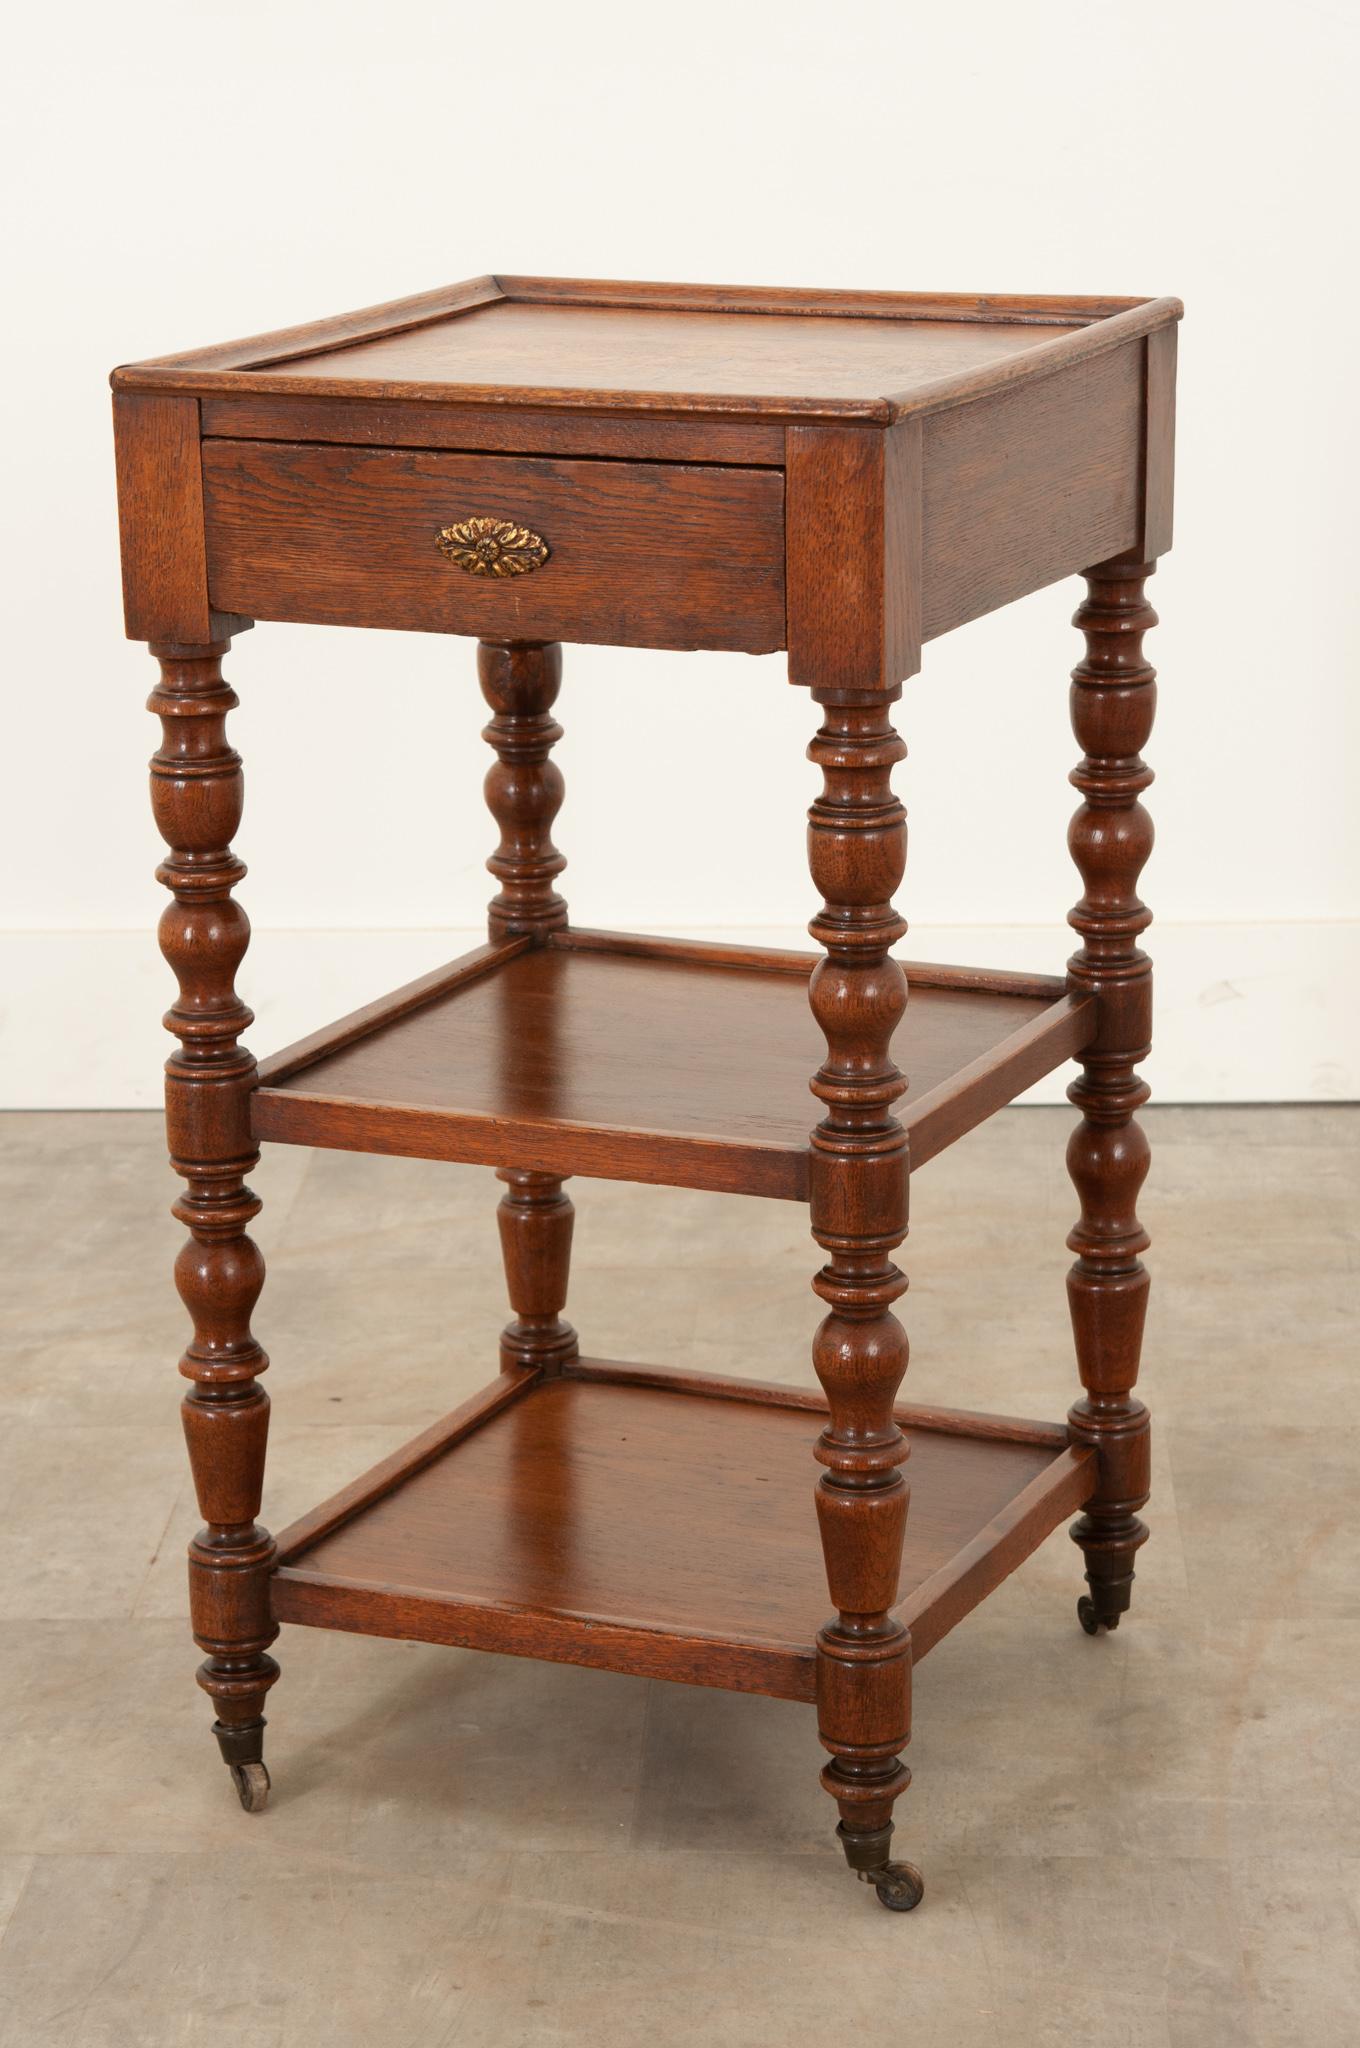 A darling petite etagere from England, crafted circa 1870 from solid oak. Two lower tiers are connected to beautifully turned and styled upright supports. Featuring its original casters, it has the ability to turn 360 degrees. Great for adding a bit